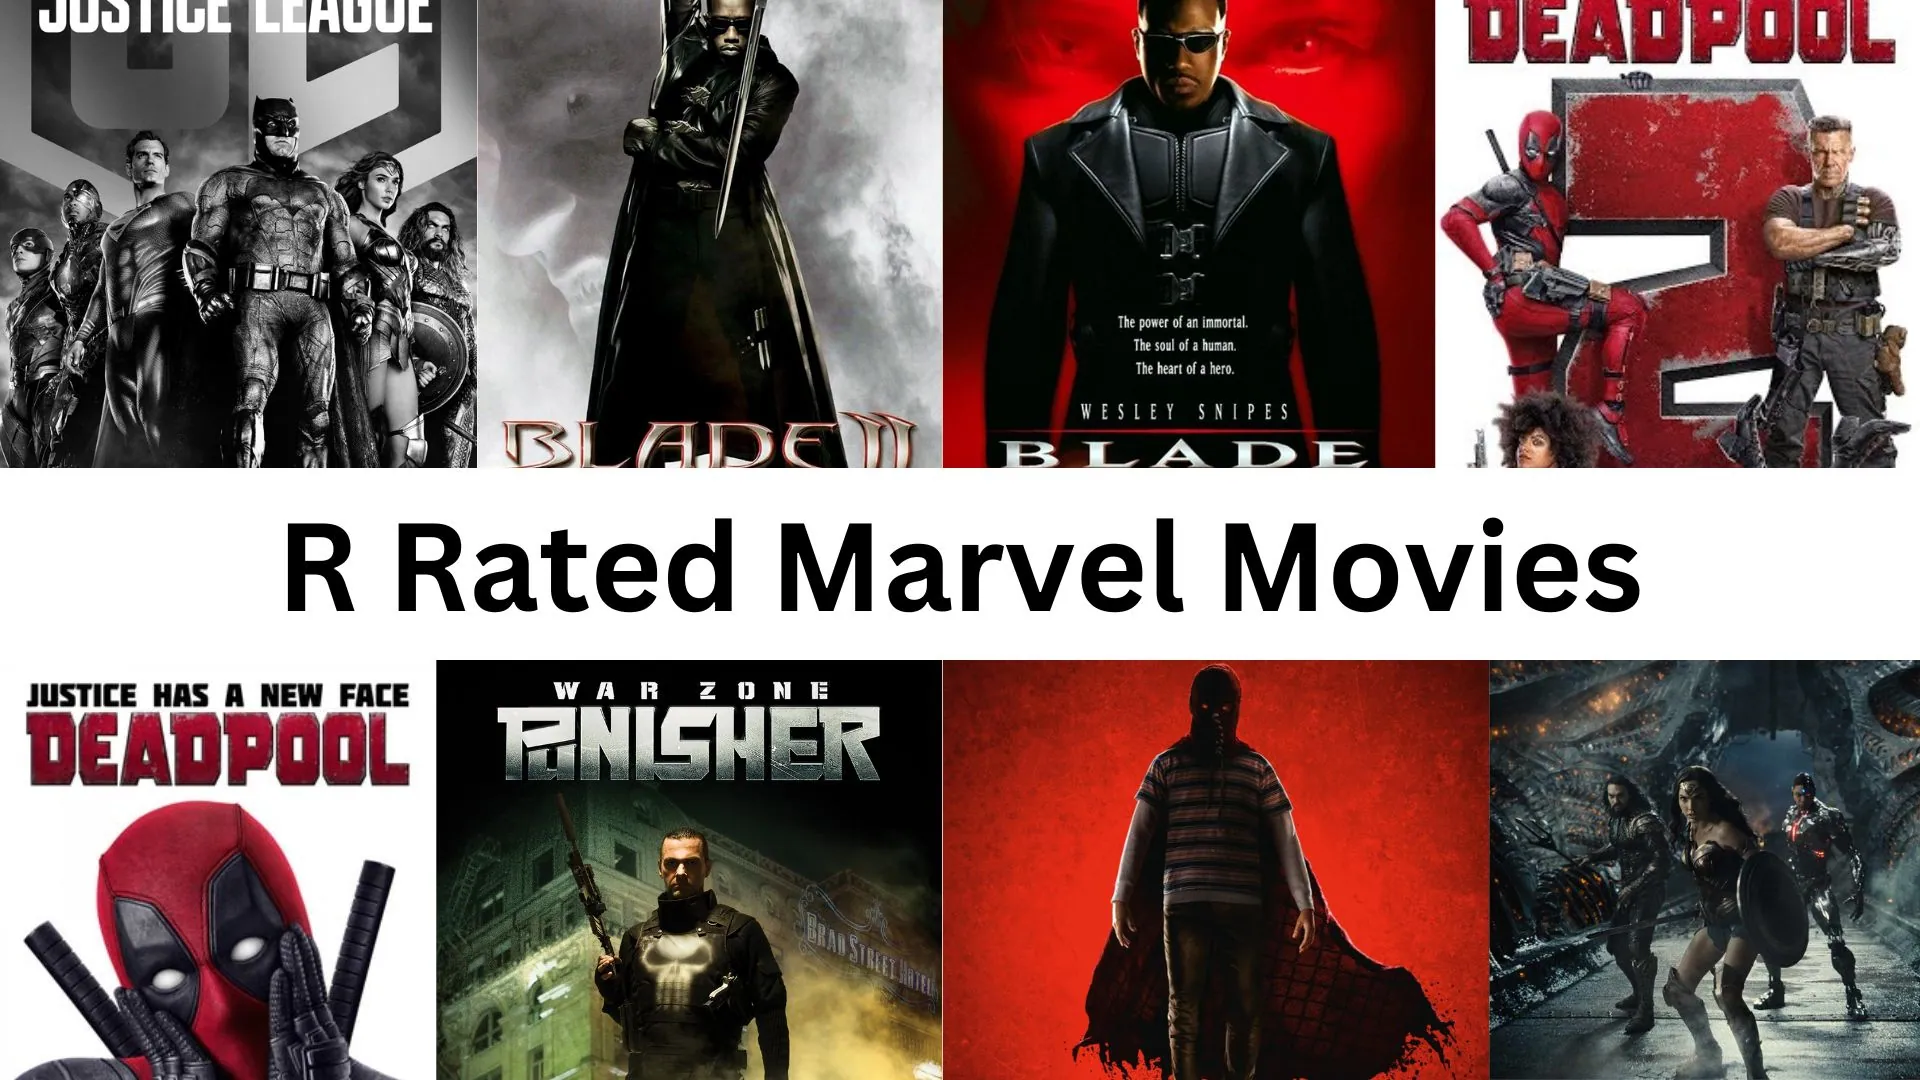 R Rated Marvel Movies